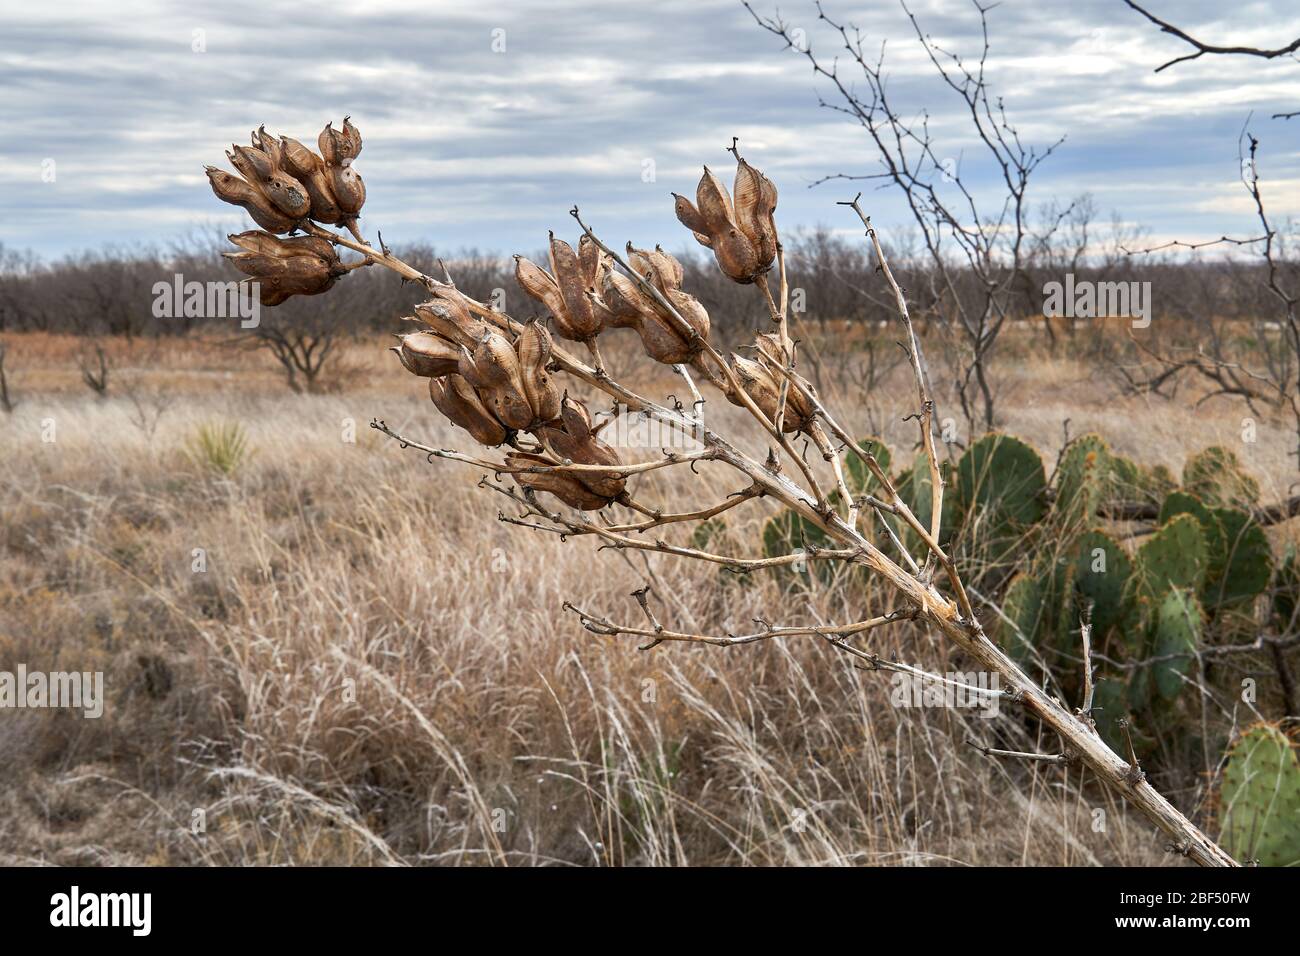 Dry brown Yucca Plant blooms against winter desert landscape. Texas Stock Photo